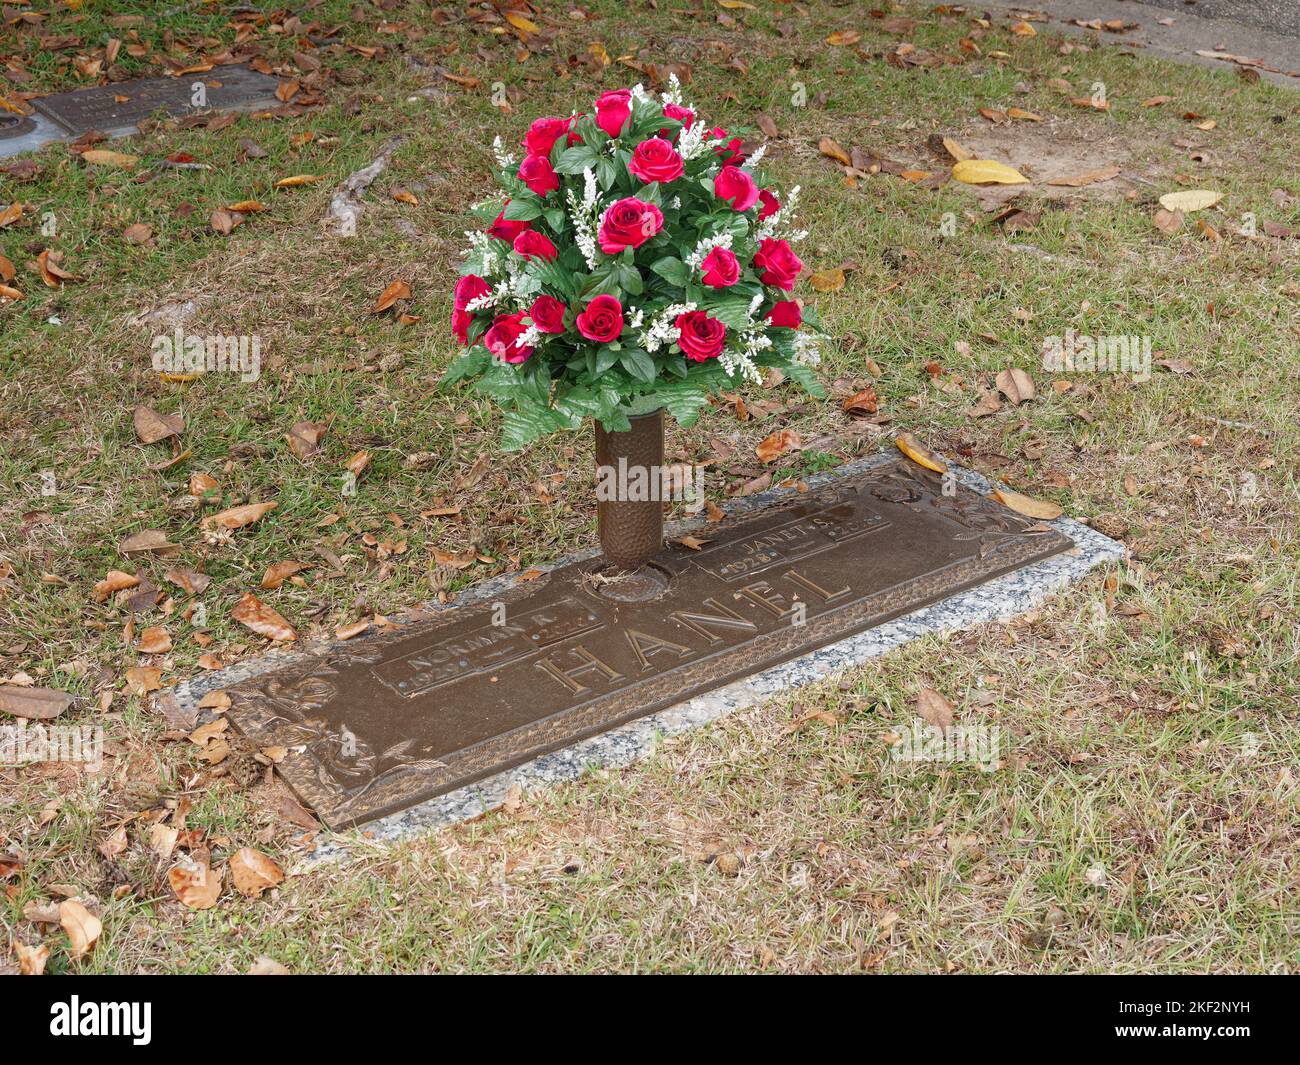 Family grave site with a bouquet of flowers, red roses, in a bronze vase over the grave marker in Montgomery Alabama, USA. Stock Photo